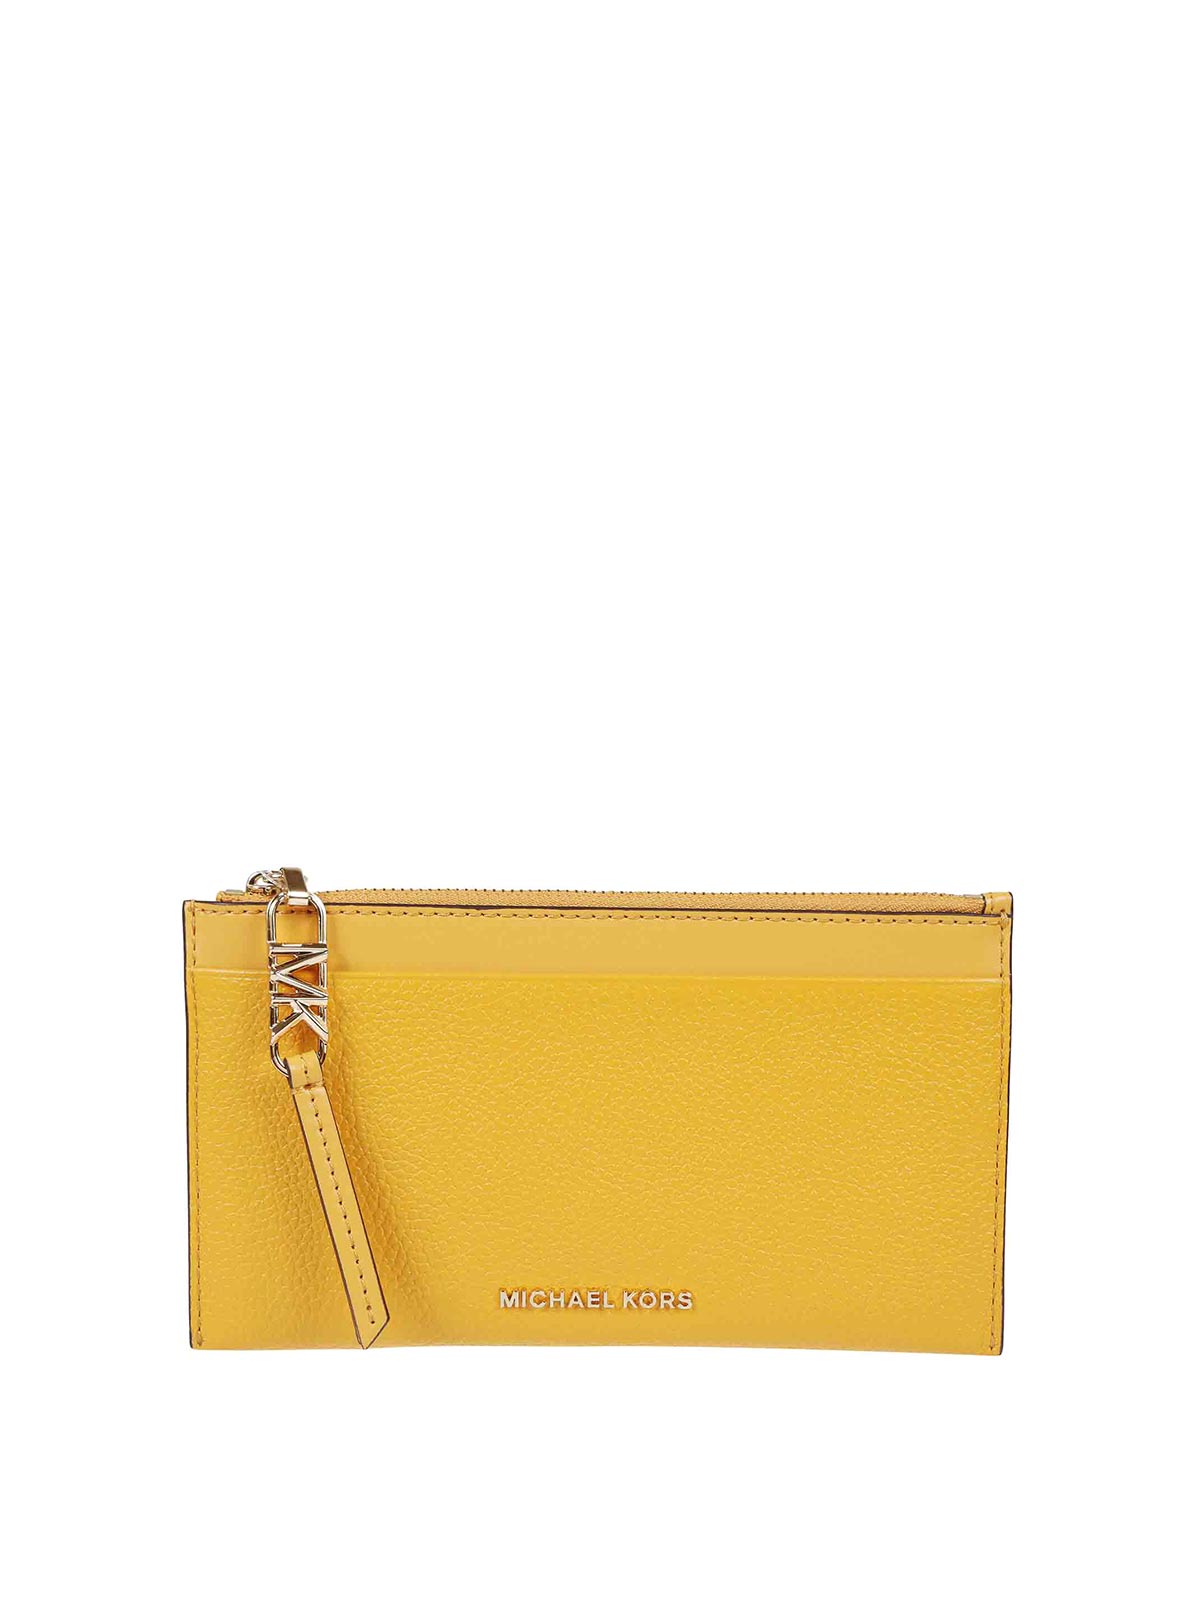 Michael Kors Empire Leather Wallet In Yellow